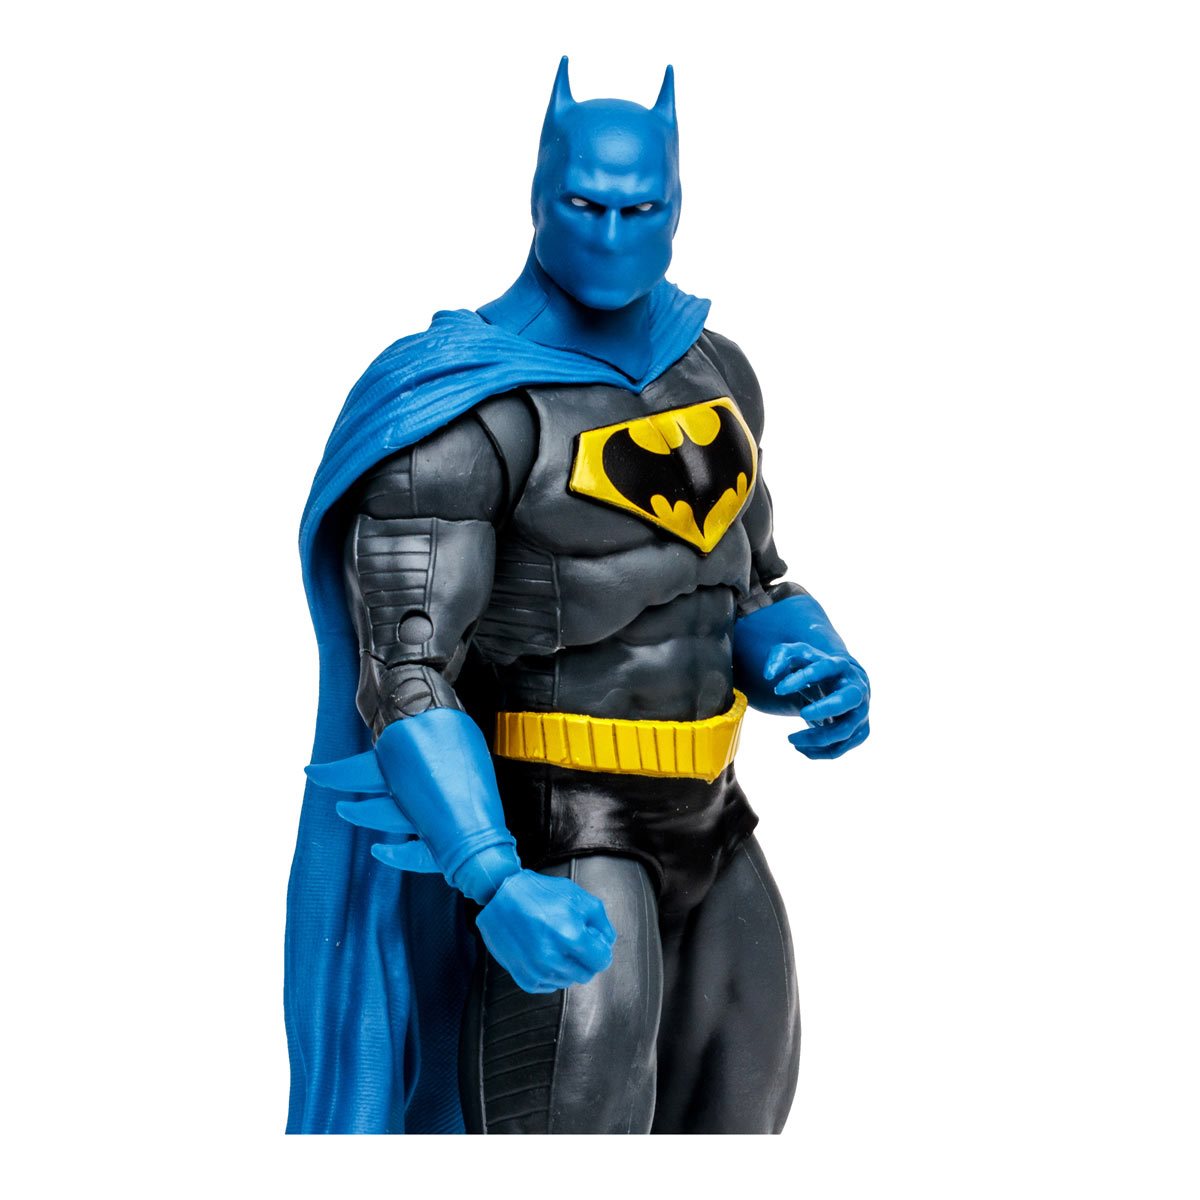 Looking At And Talking About The New McFarlane Toys And Spin Master DC  Comics Action Figures - Tons Of Comparison Images